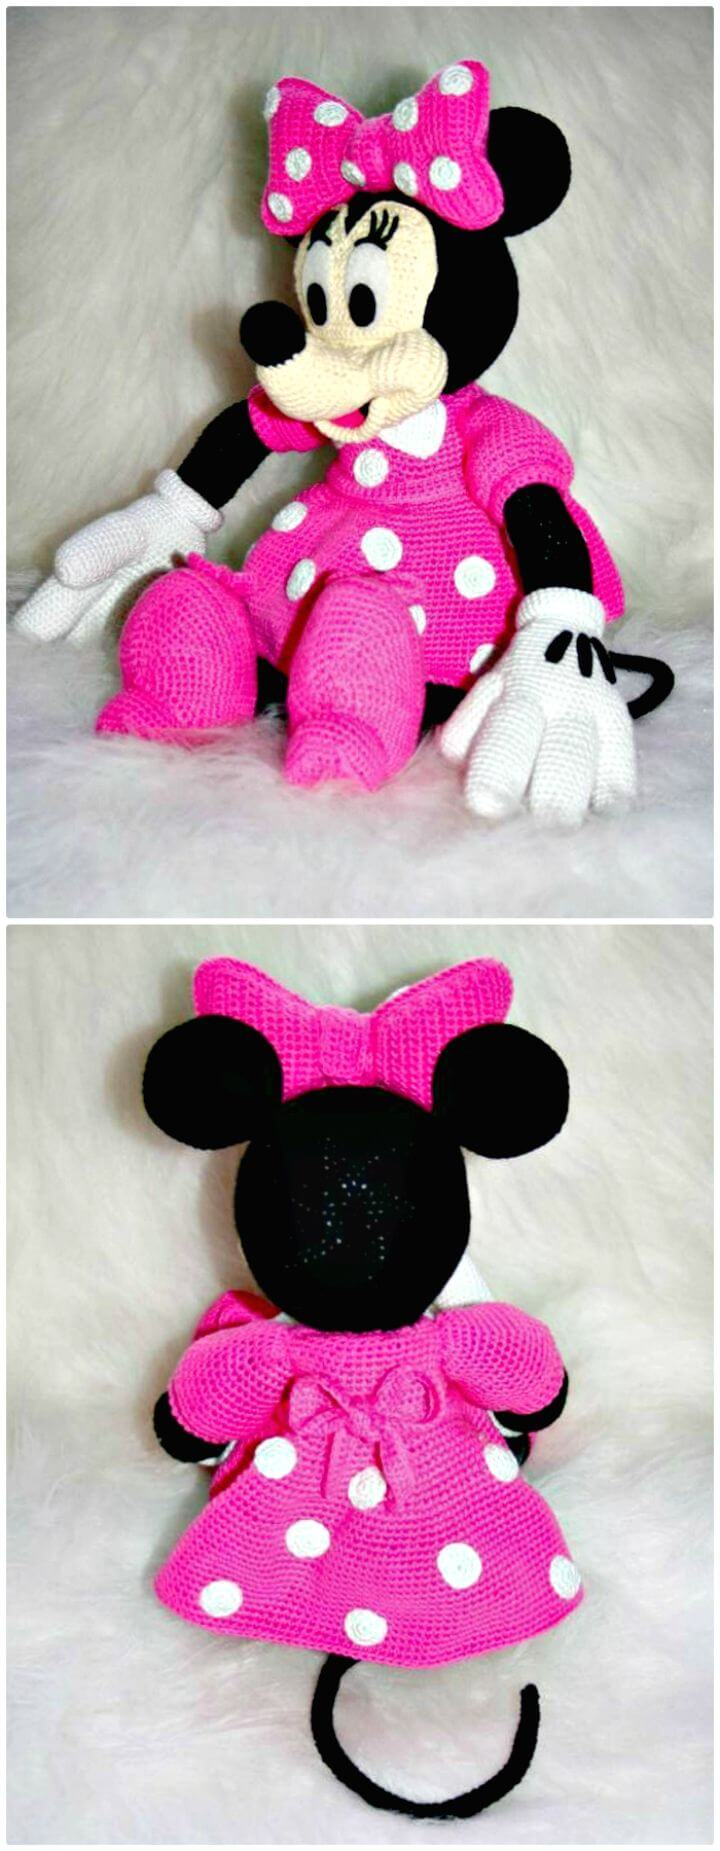 Free Crochet Pattern For Mickey Mouse Hat Crochet Mickey Mouse Patterns Hat Amigurumi Diy Crafts